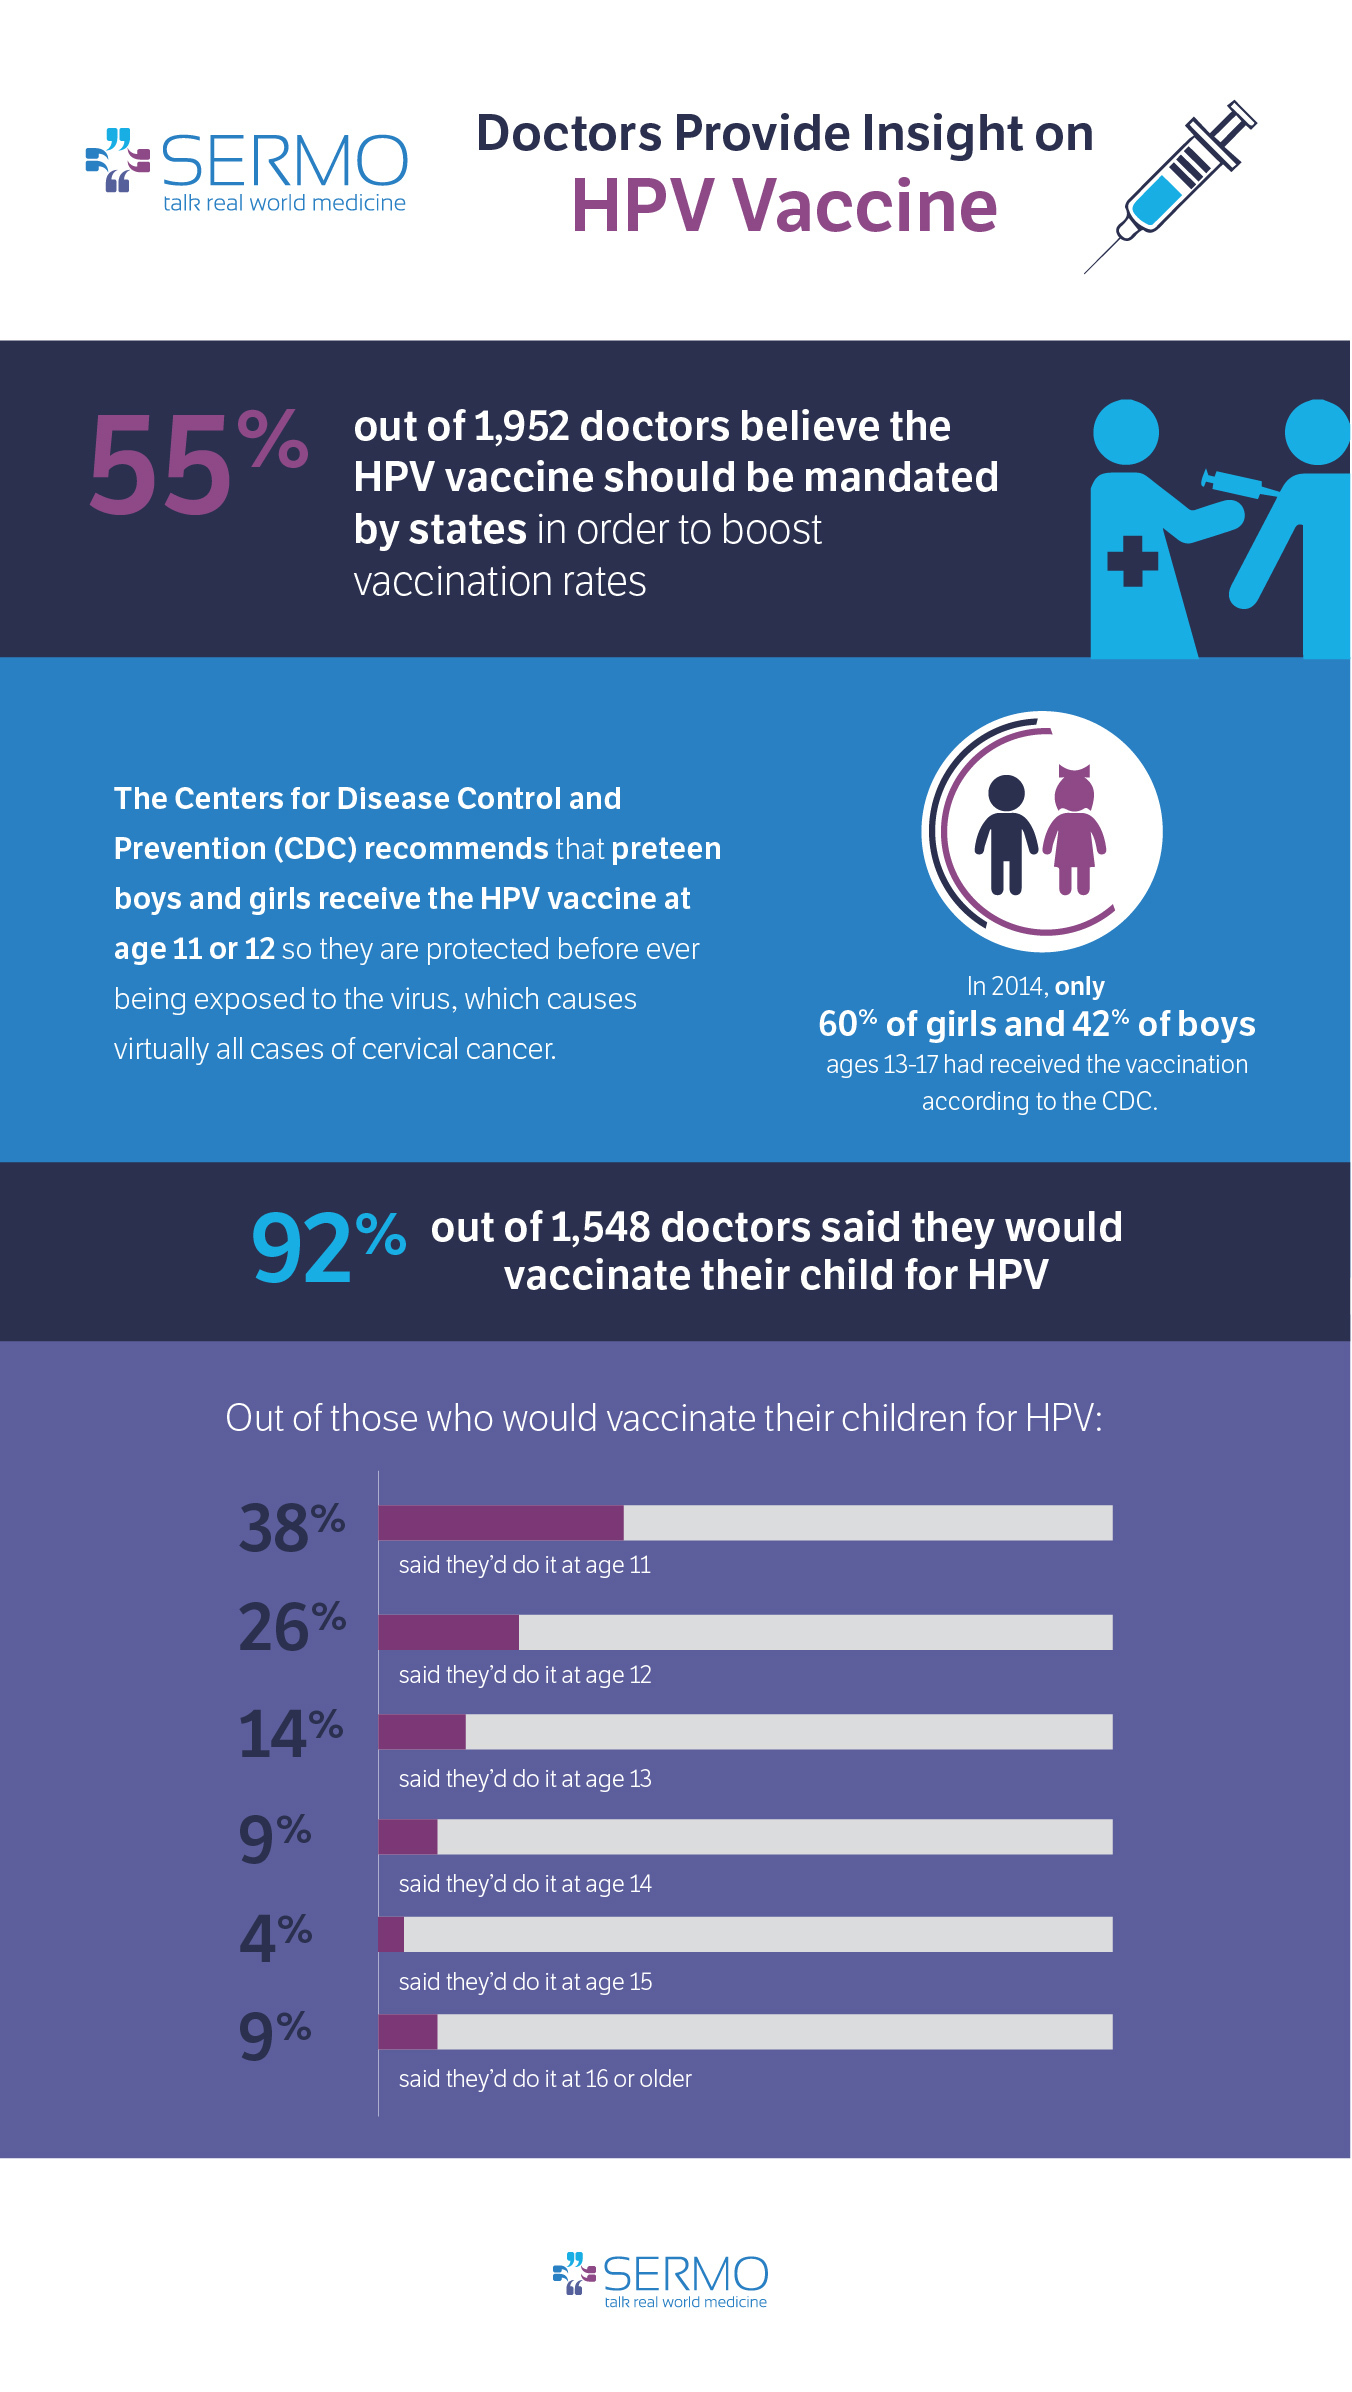 Hpv gardasil pros and cons -